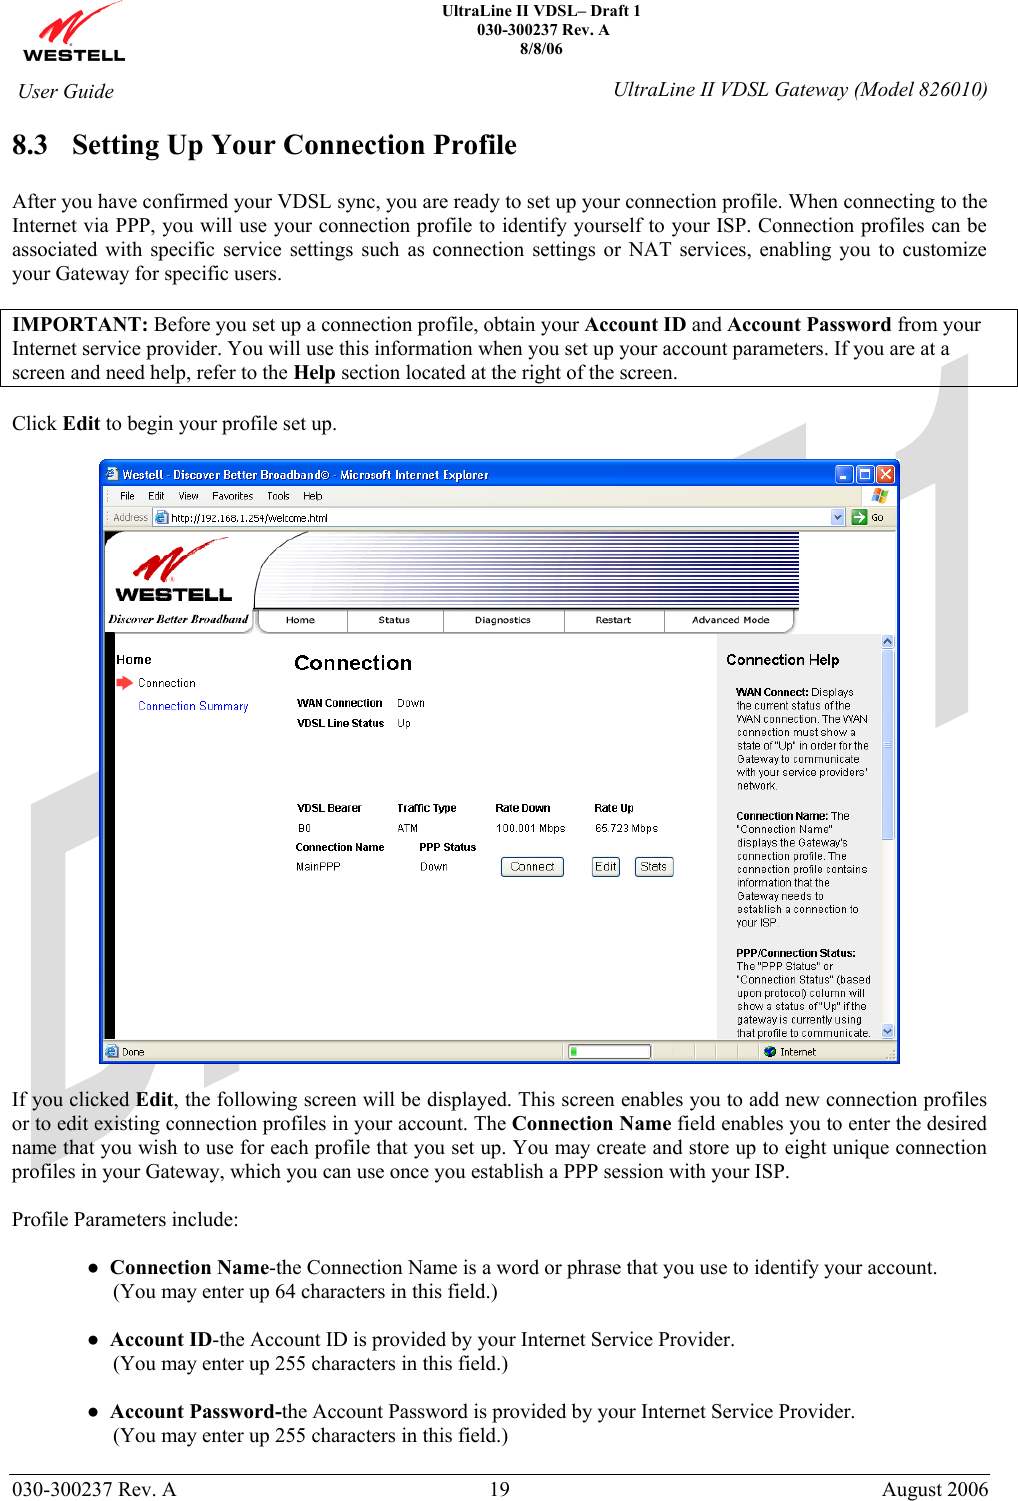    UltraLine II VDSL– Draft 1  030-300237 Rev. A 8/8/06   030-300237 Rev. A  19  August 2006  User Guide  UltraLine II VDSL Gateway (Model 826010) 8.3 Setting Up Your Connection Profile  After you have confirmed your VDSL sync, you are ready to set up your connection profile. When connecting to the Internet via PPP, you will use your connection profile to identify yourself to your ISP. Connection profiles can be associated with specific service settings such as connection settings or NAT services, enabling you to customize your Gateway for specific users.   IMPORTANT: Before you set up a connection profile, obtain your Account ID and Account Password from your Internet service provider. You will use this information when you set up your account parameters. If you are at a screen and need help, refer to the Help section located at the right of the screen.  Click Edit to begin your profile set up.    If you clicked Edit, the following screen will be displayed. This screen enables you to add new connection profiles or to edit existing connection profiles in your account. The Connection Name field enables you to enter the desired name that you wish to use for each profile that you set up. You may create and store up to eight unique connection profiles in your Gateway, which you can use once you establish a PPP session with your ISP.  Profile Parameters include:  ●  Connection Name-the Connection Name is a word or phrase that you use to identify your account.       (You may enter up 64 characters in this field.)   ●  Account ID-the Account ID is provided by your Internet Service Provider.      (You may enter up 255 characters in this field.)  ●  Account Password-the Account Password is provided by your Internet Service Provider.      (You may enter up 255 characters in this field.)  